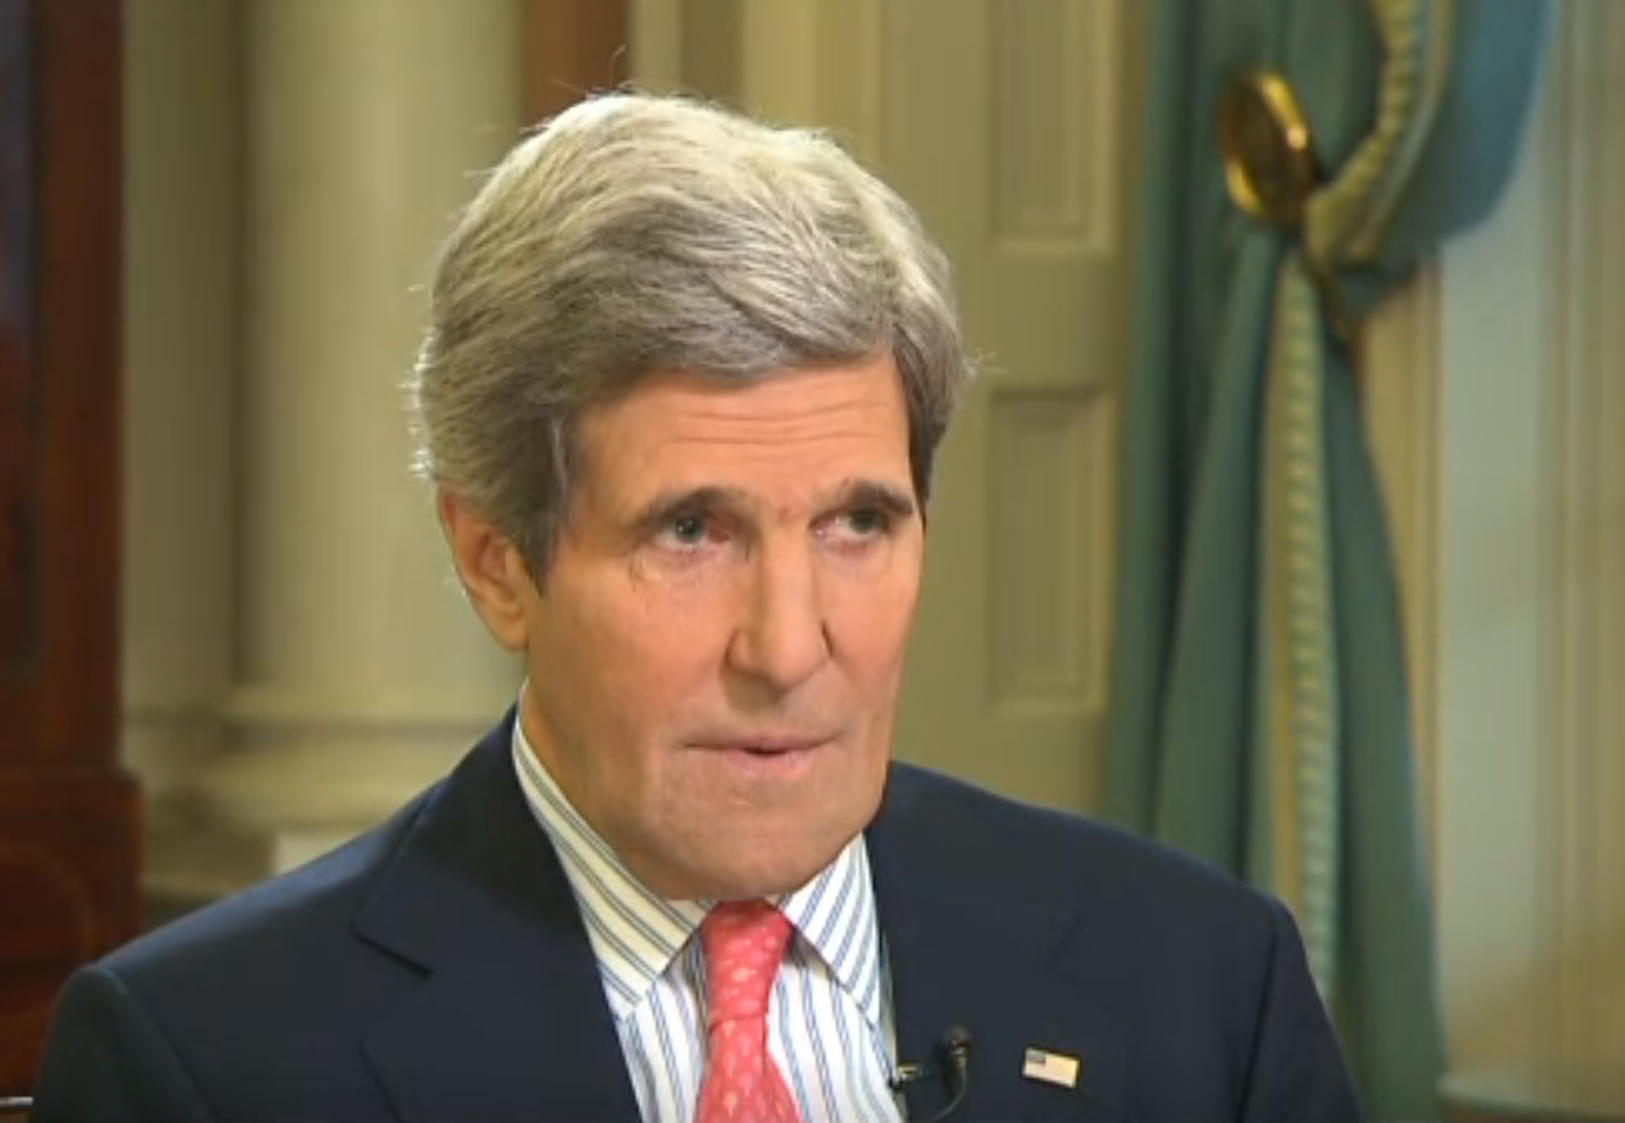 Kerry: France 'on Notice' About Iran Sanctions Violations